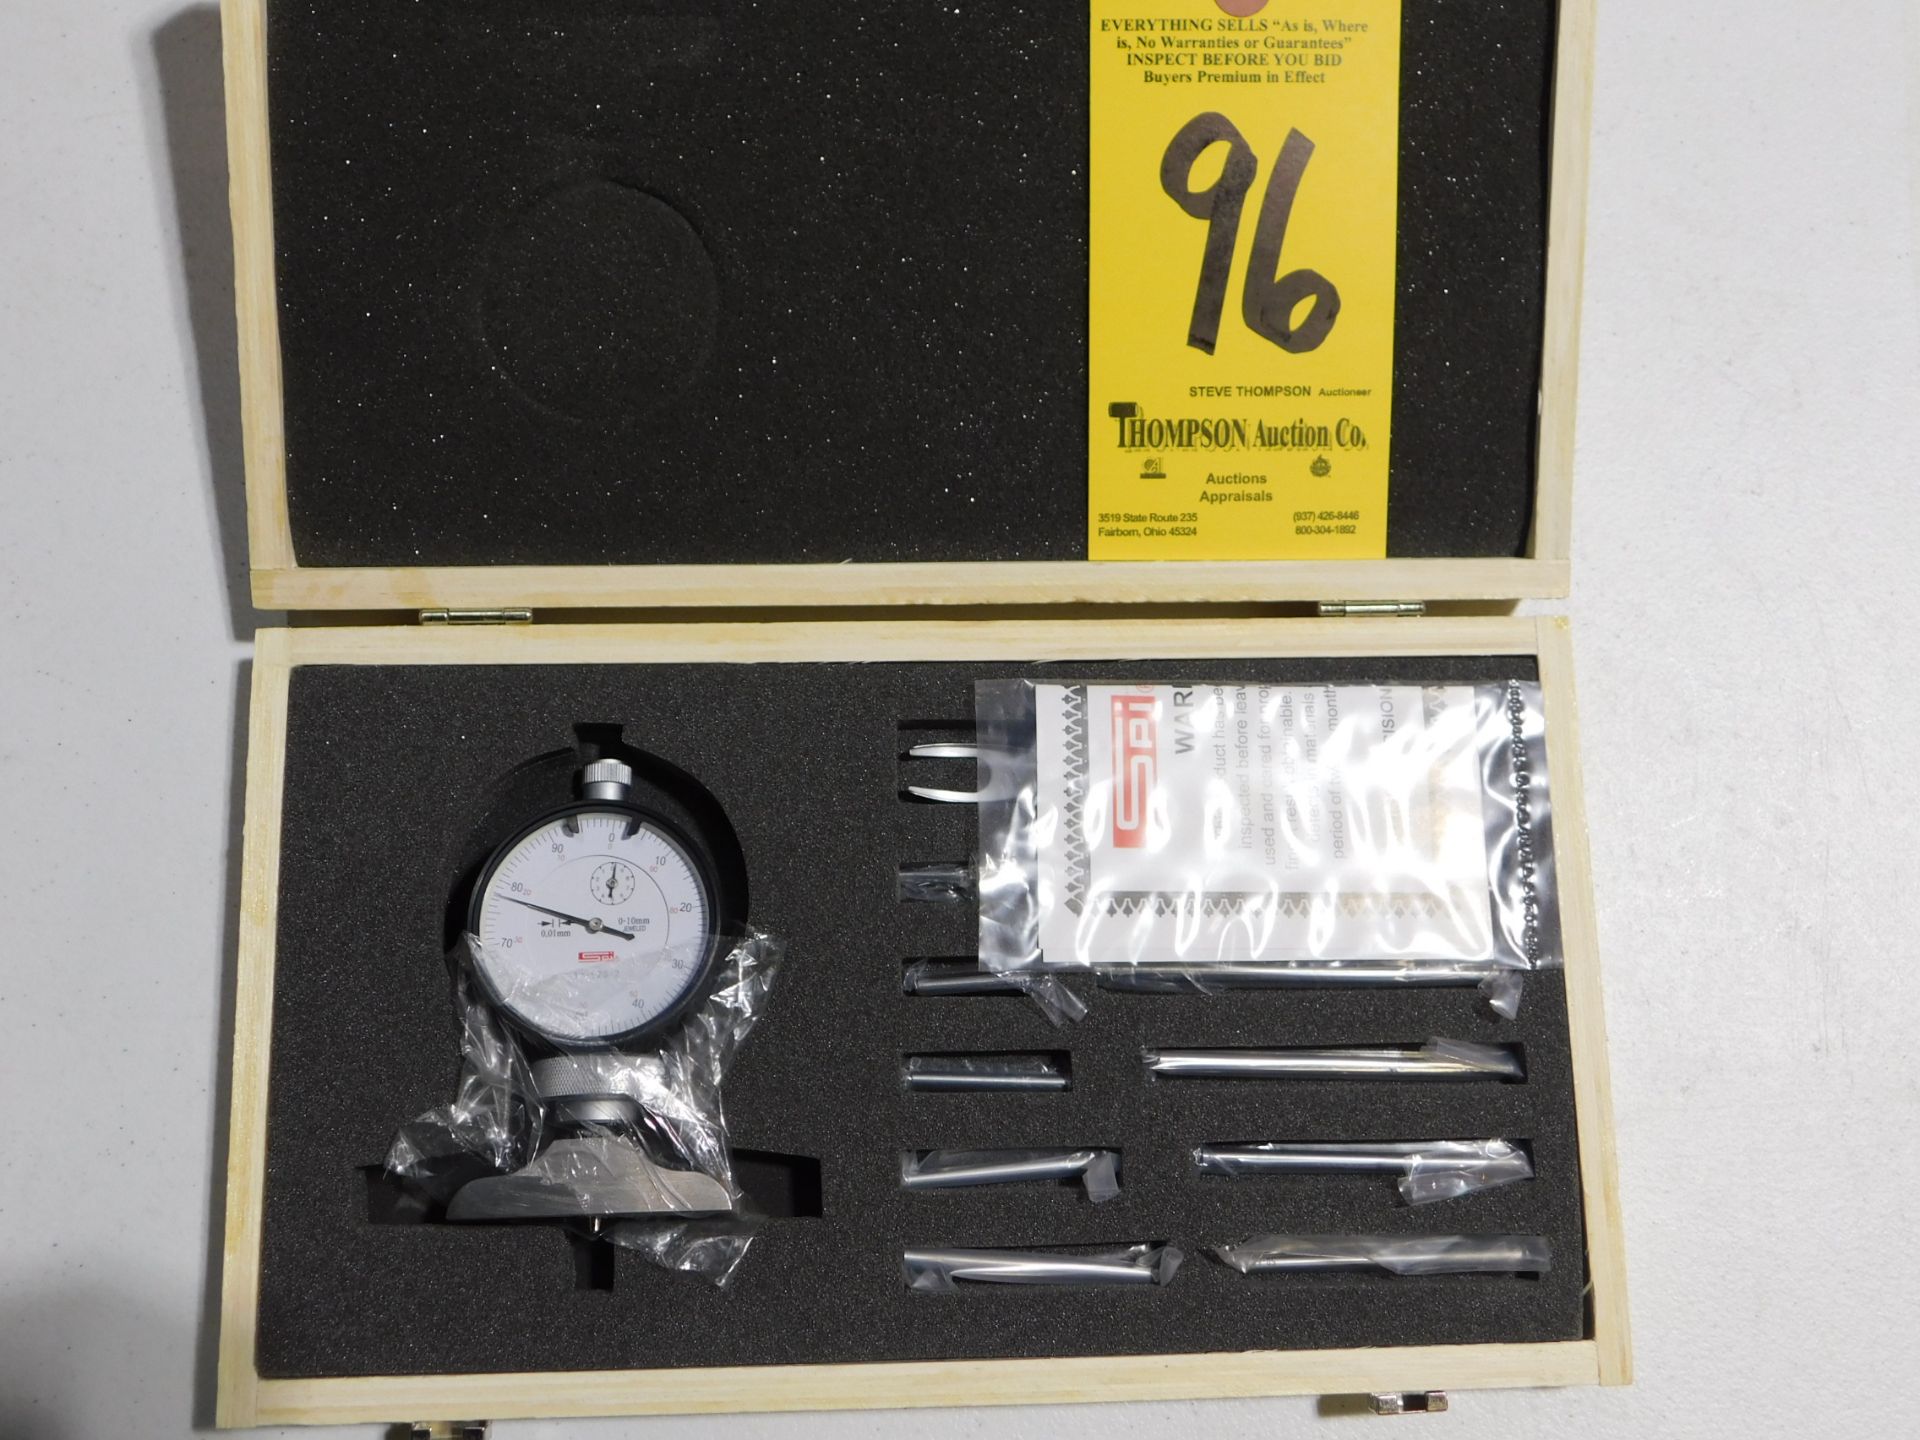 SPI 14-529-2 Dial Depth Gage, Lot Location 3204 Olympia Dr. A, Lafayette, IN 47909